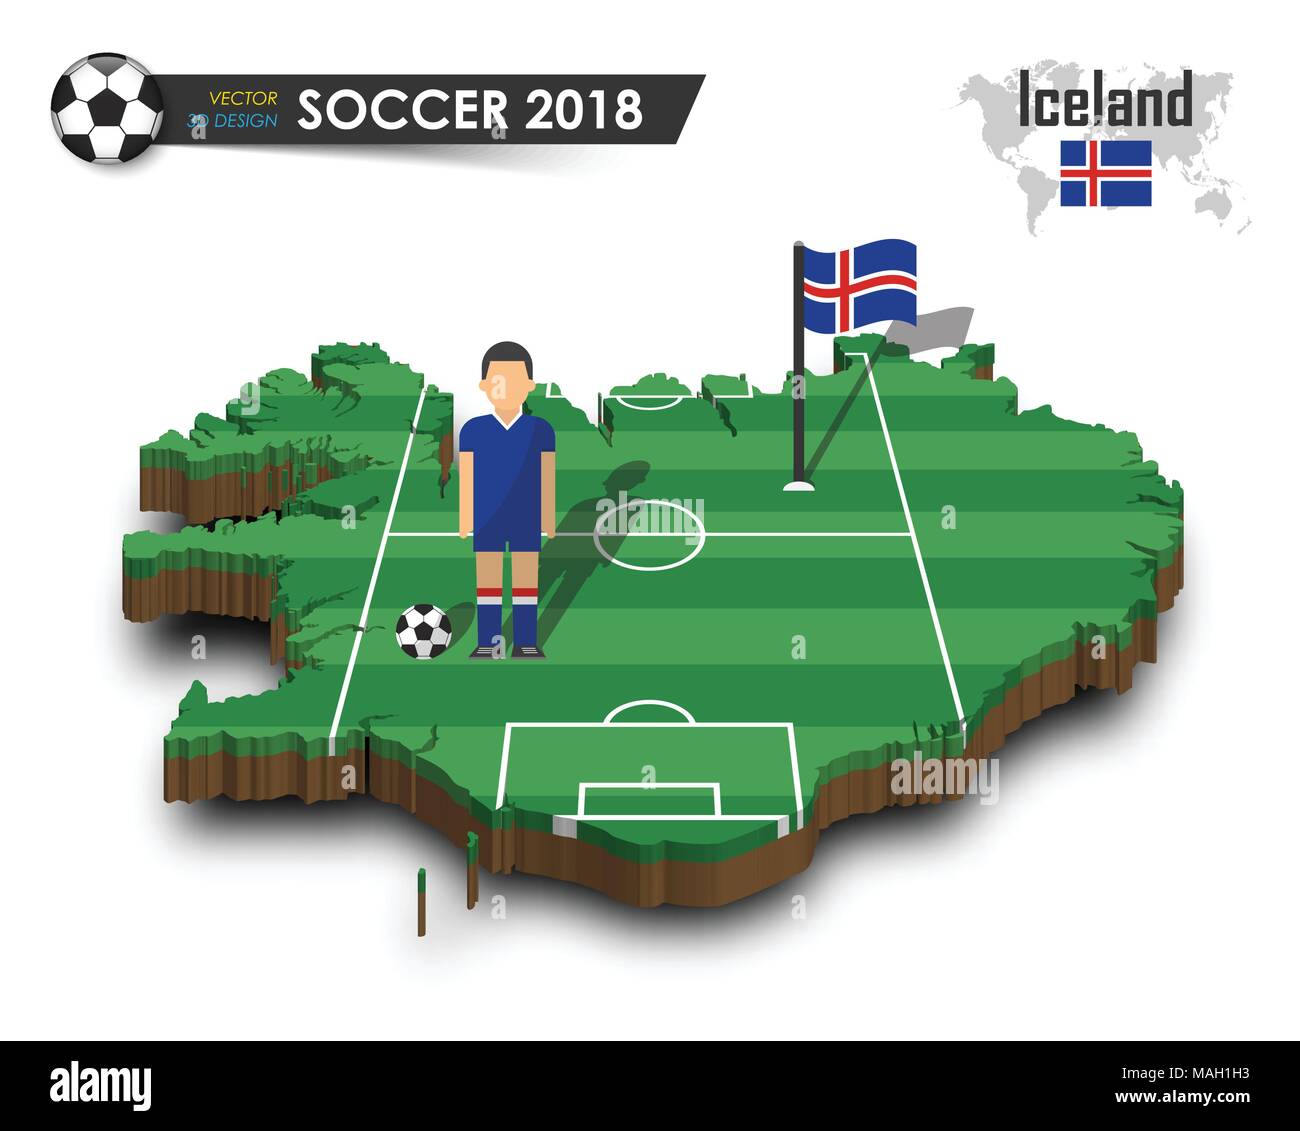 Iceland national soccer team . Football player and flag on 3d design country map . isolated background . Vector for international world championship t Stock Vector